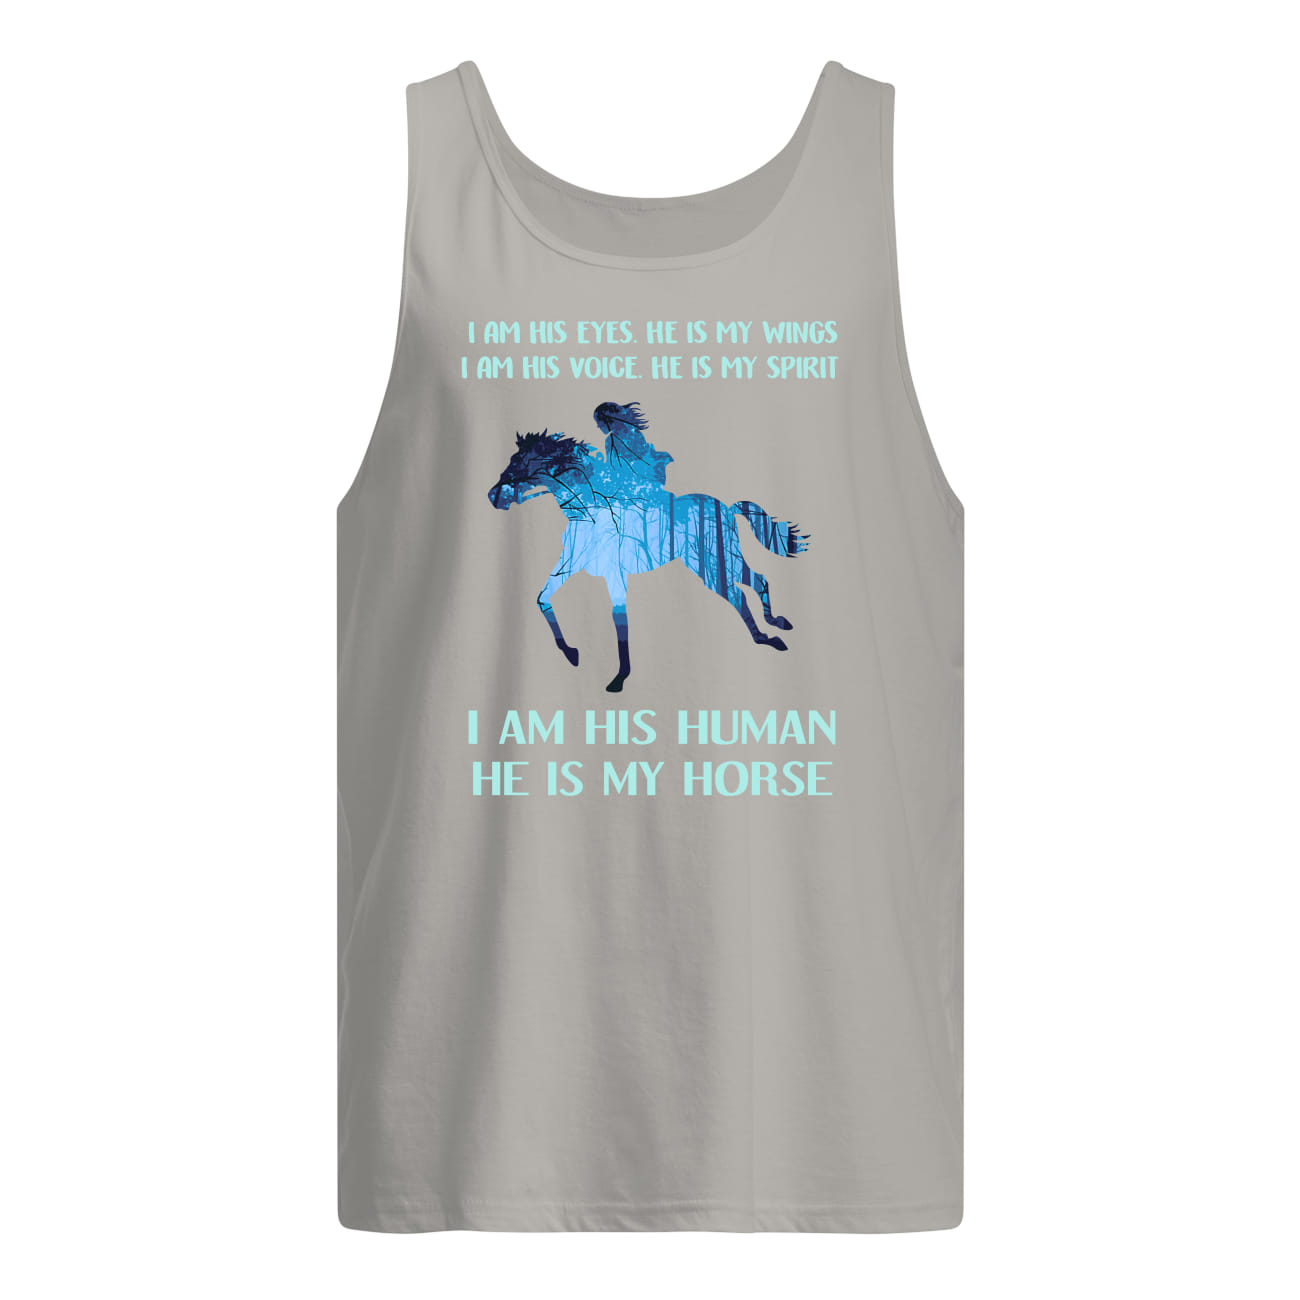 I am his eyes he is my wings I am his voice he is my spirit I am his human he is my horse tank top